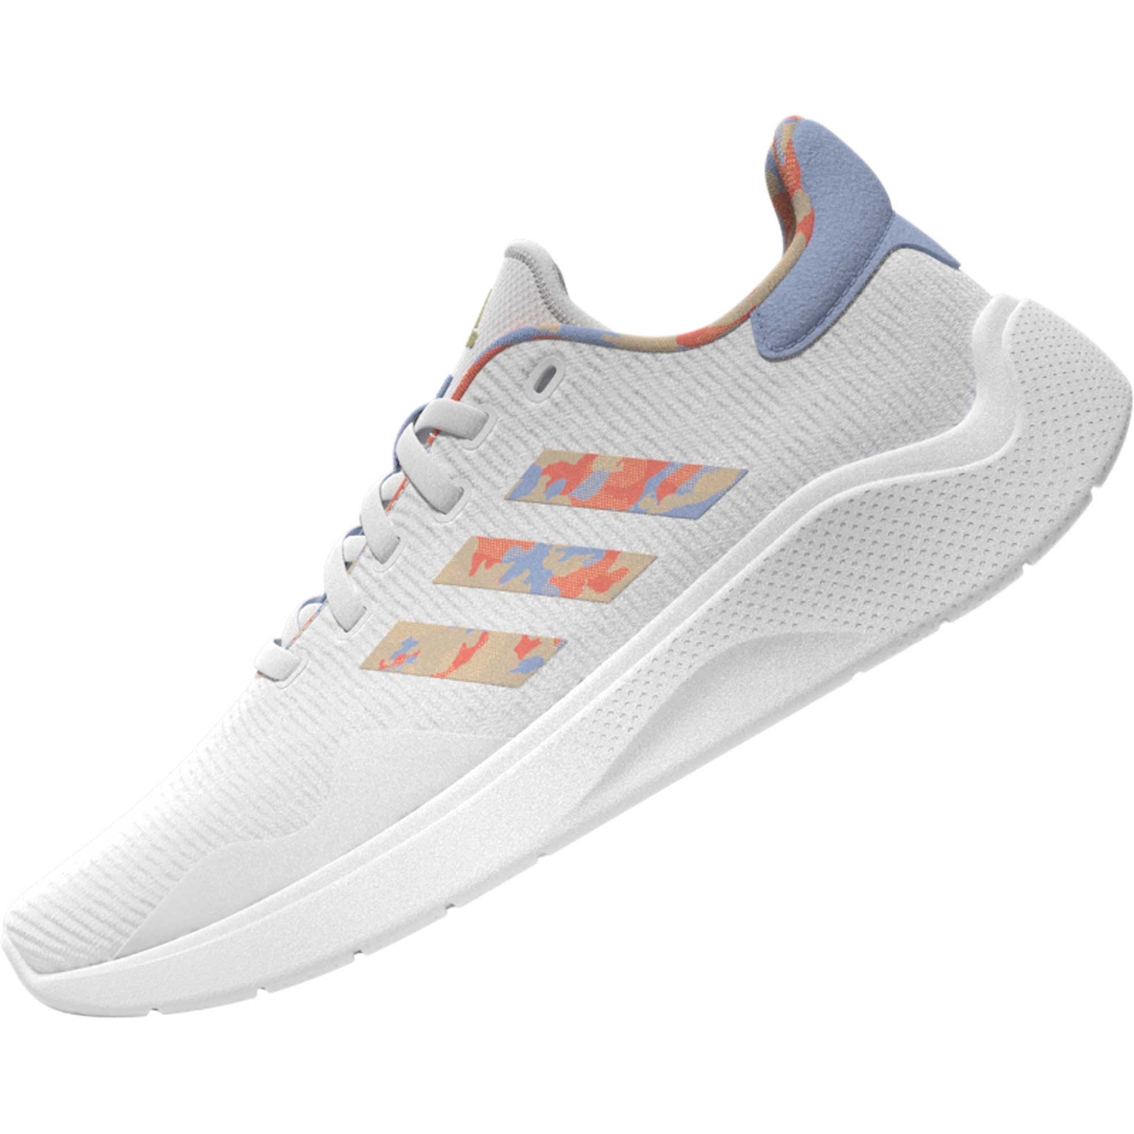 Adidas Women's Puremotion 2.0 Sneakers - Image 3 of 10